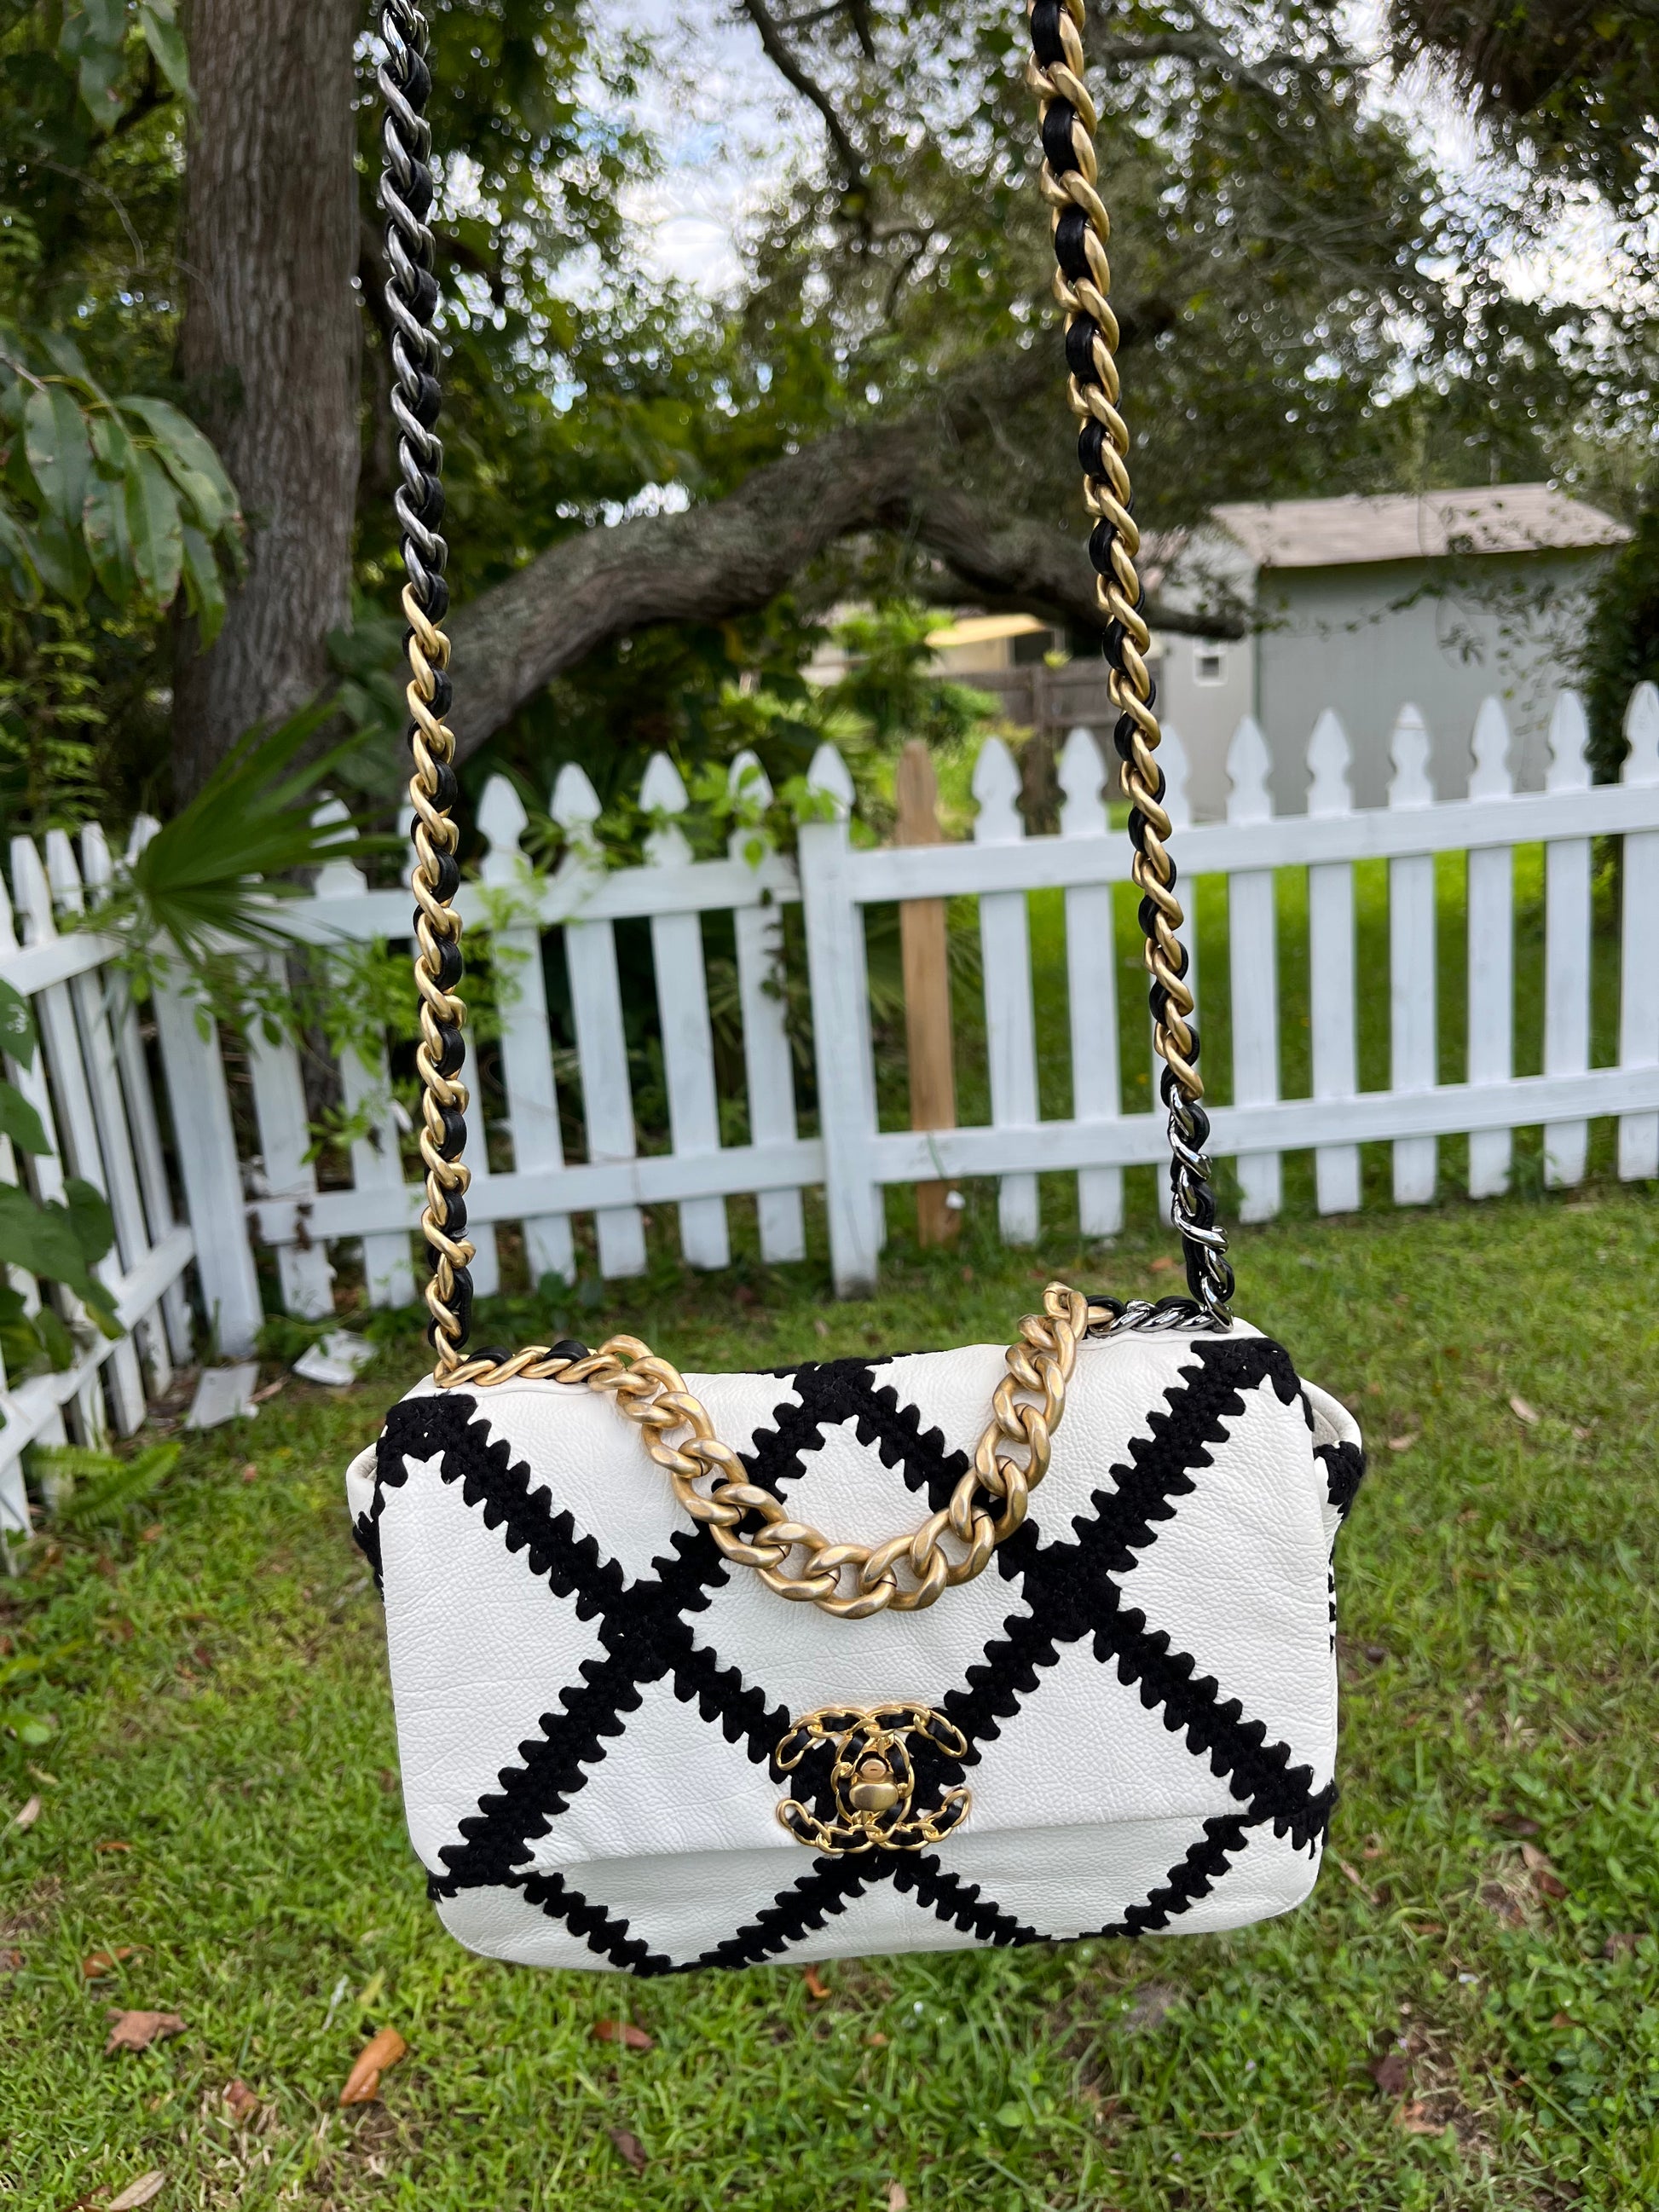 Chanel 19 Medium Crochet Quilted Calfskin Flap Bag – Its A Luv Story